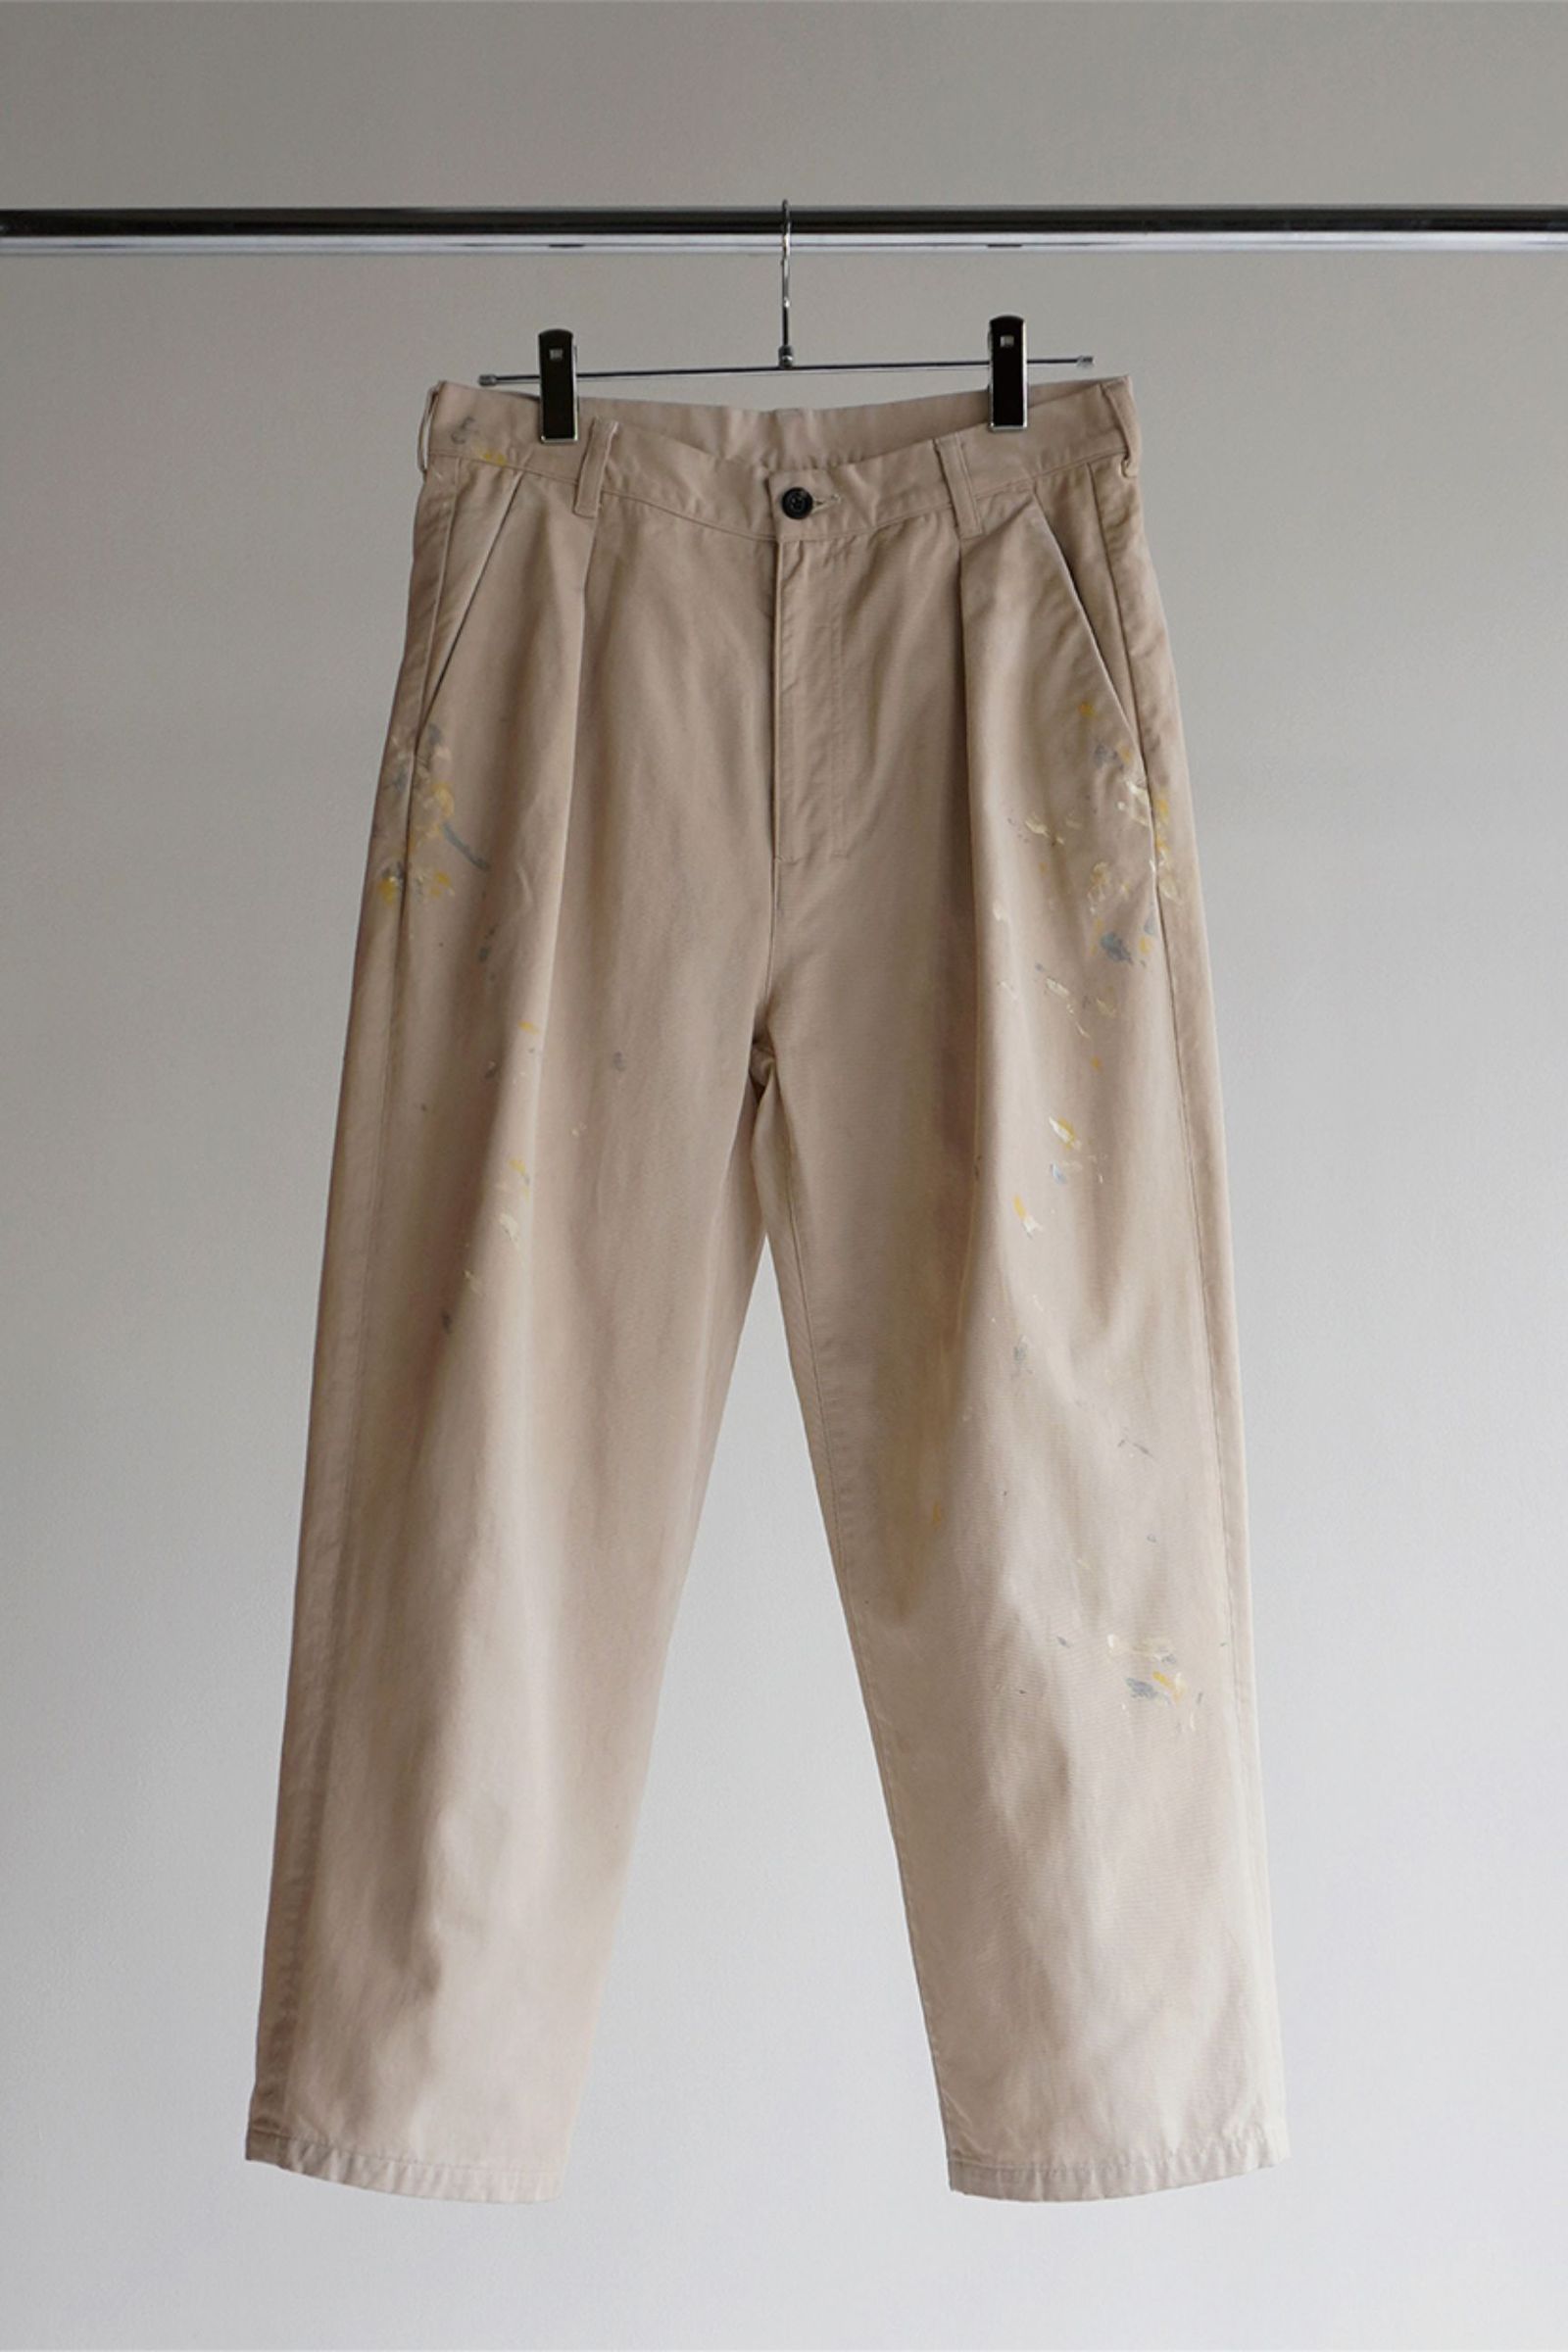 ANCELLM   PAINT CHINO TROUSERS/BEIGE   NapsNote